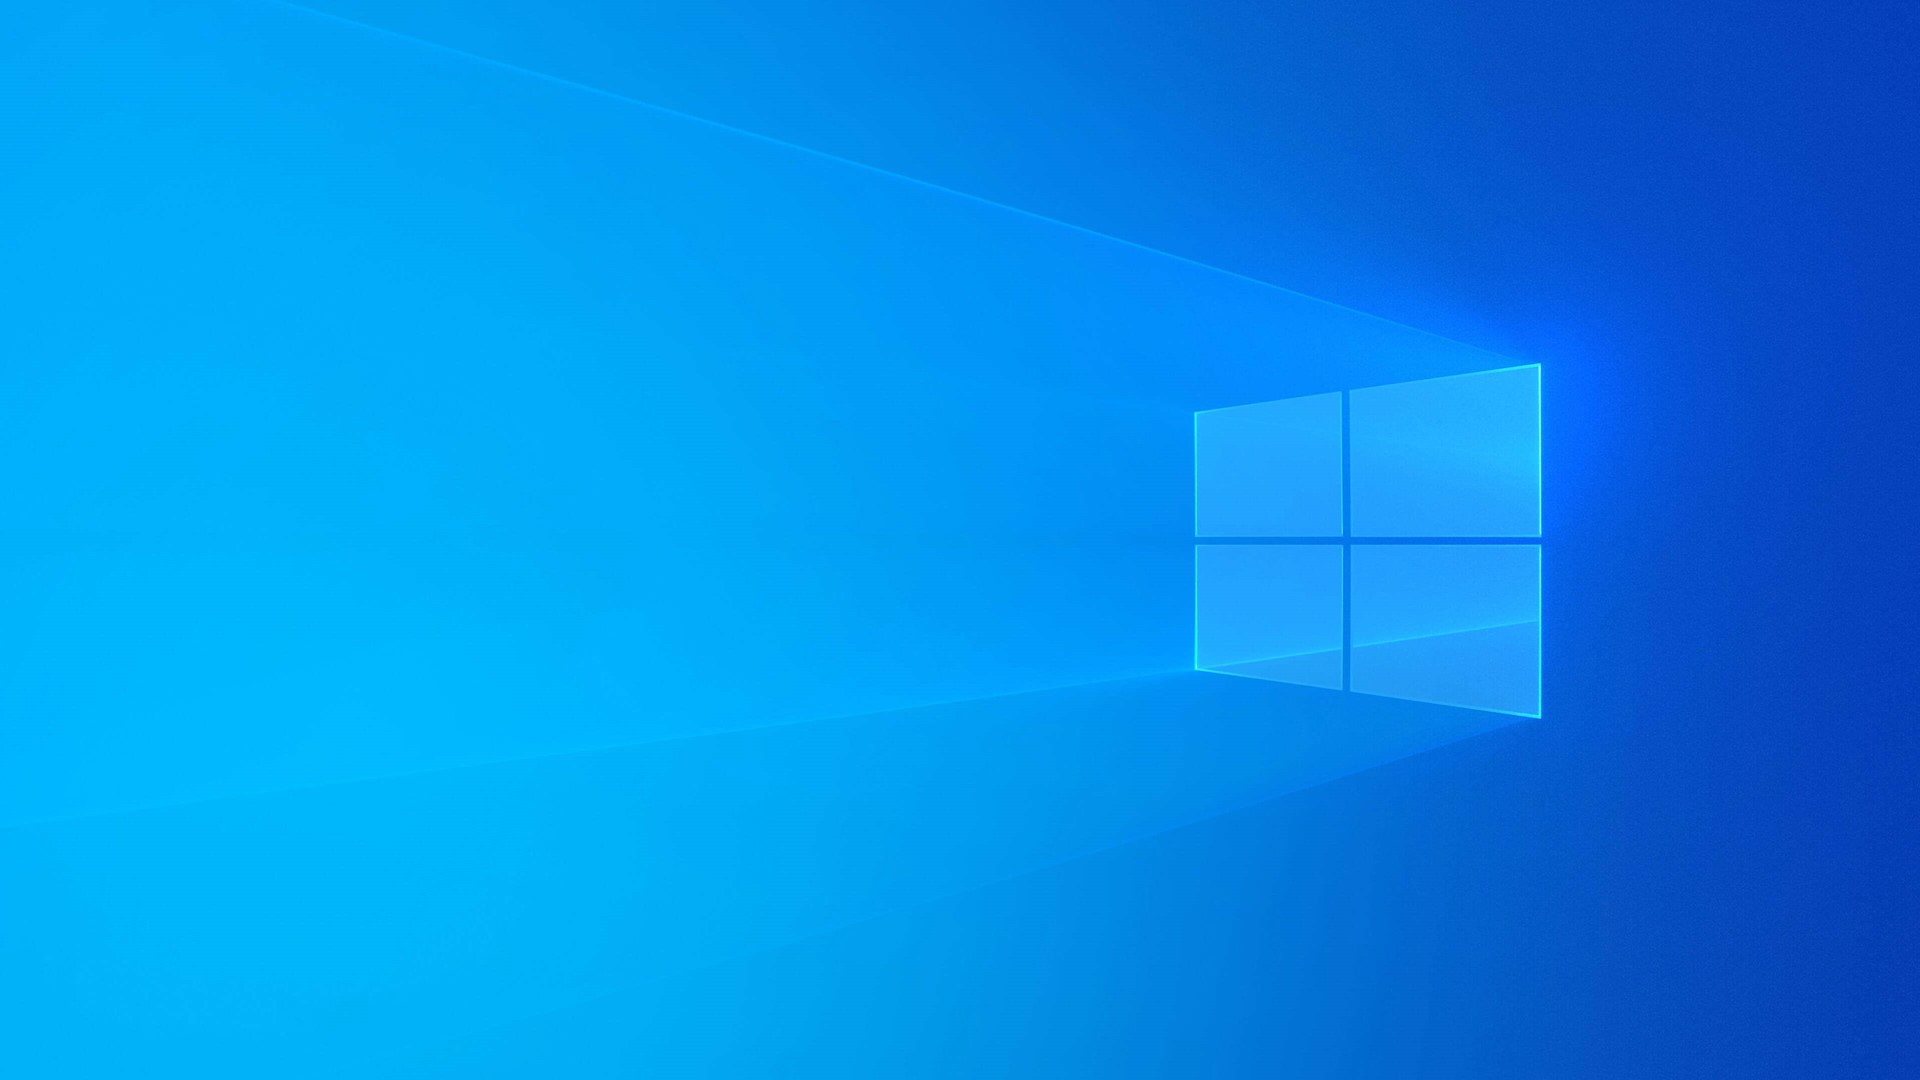 Windows 10 Wallpaper Photos Download The BEST Free Windows 10 Wallpaper  Stock Photos  HD Images